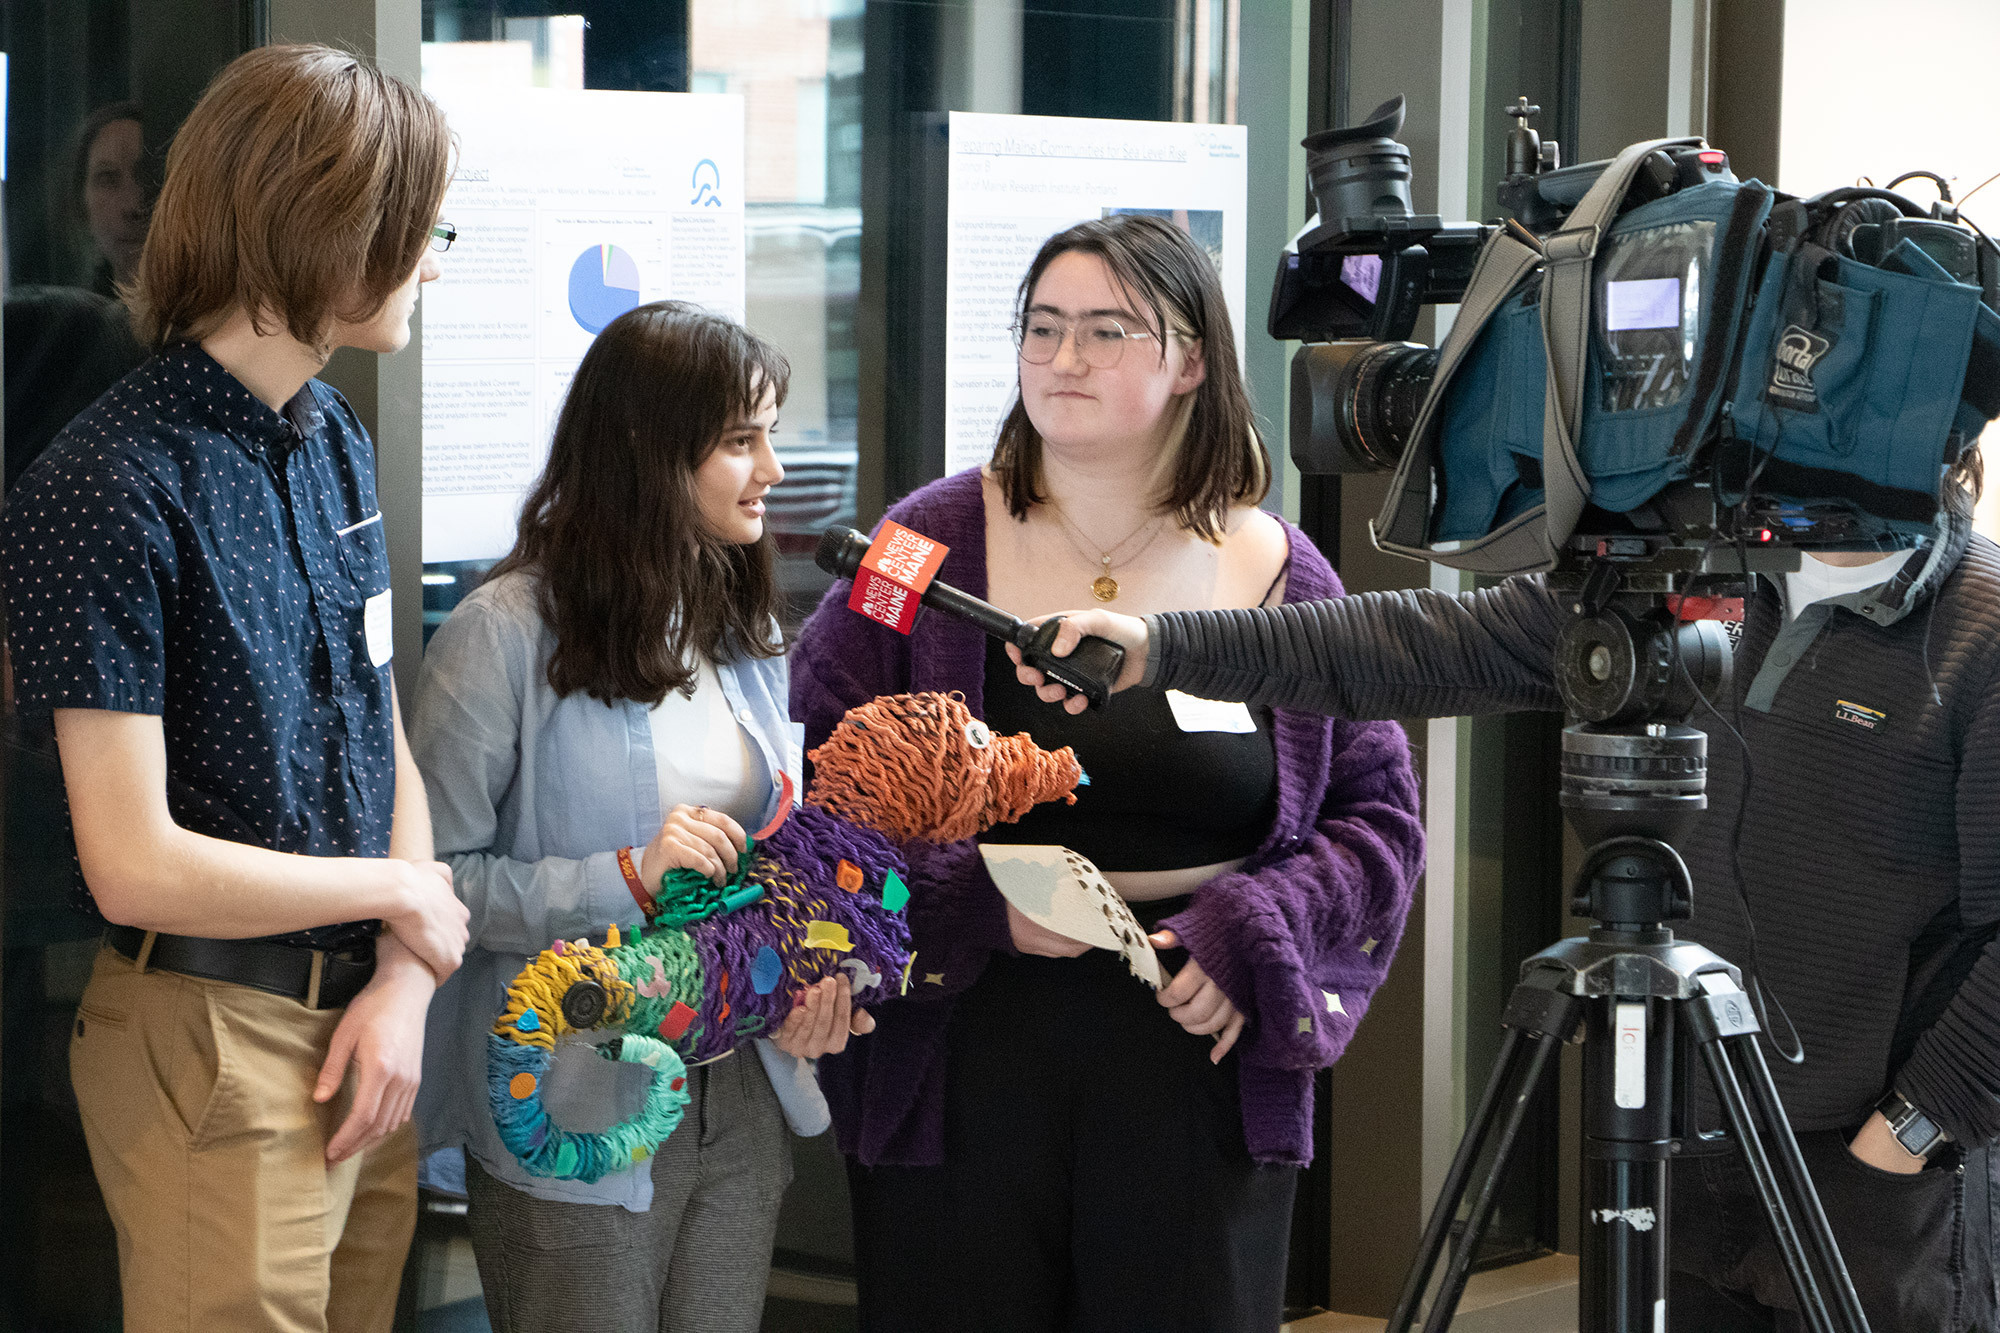 Findings from the Field: Students and Professionals Connect at Research Symposium